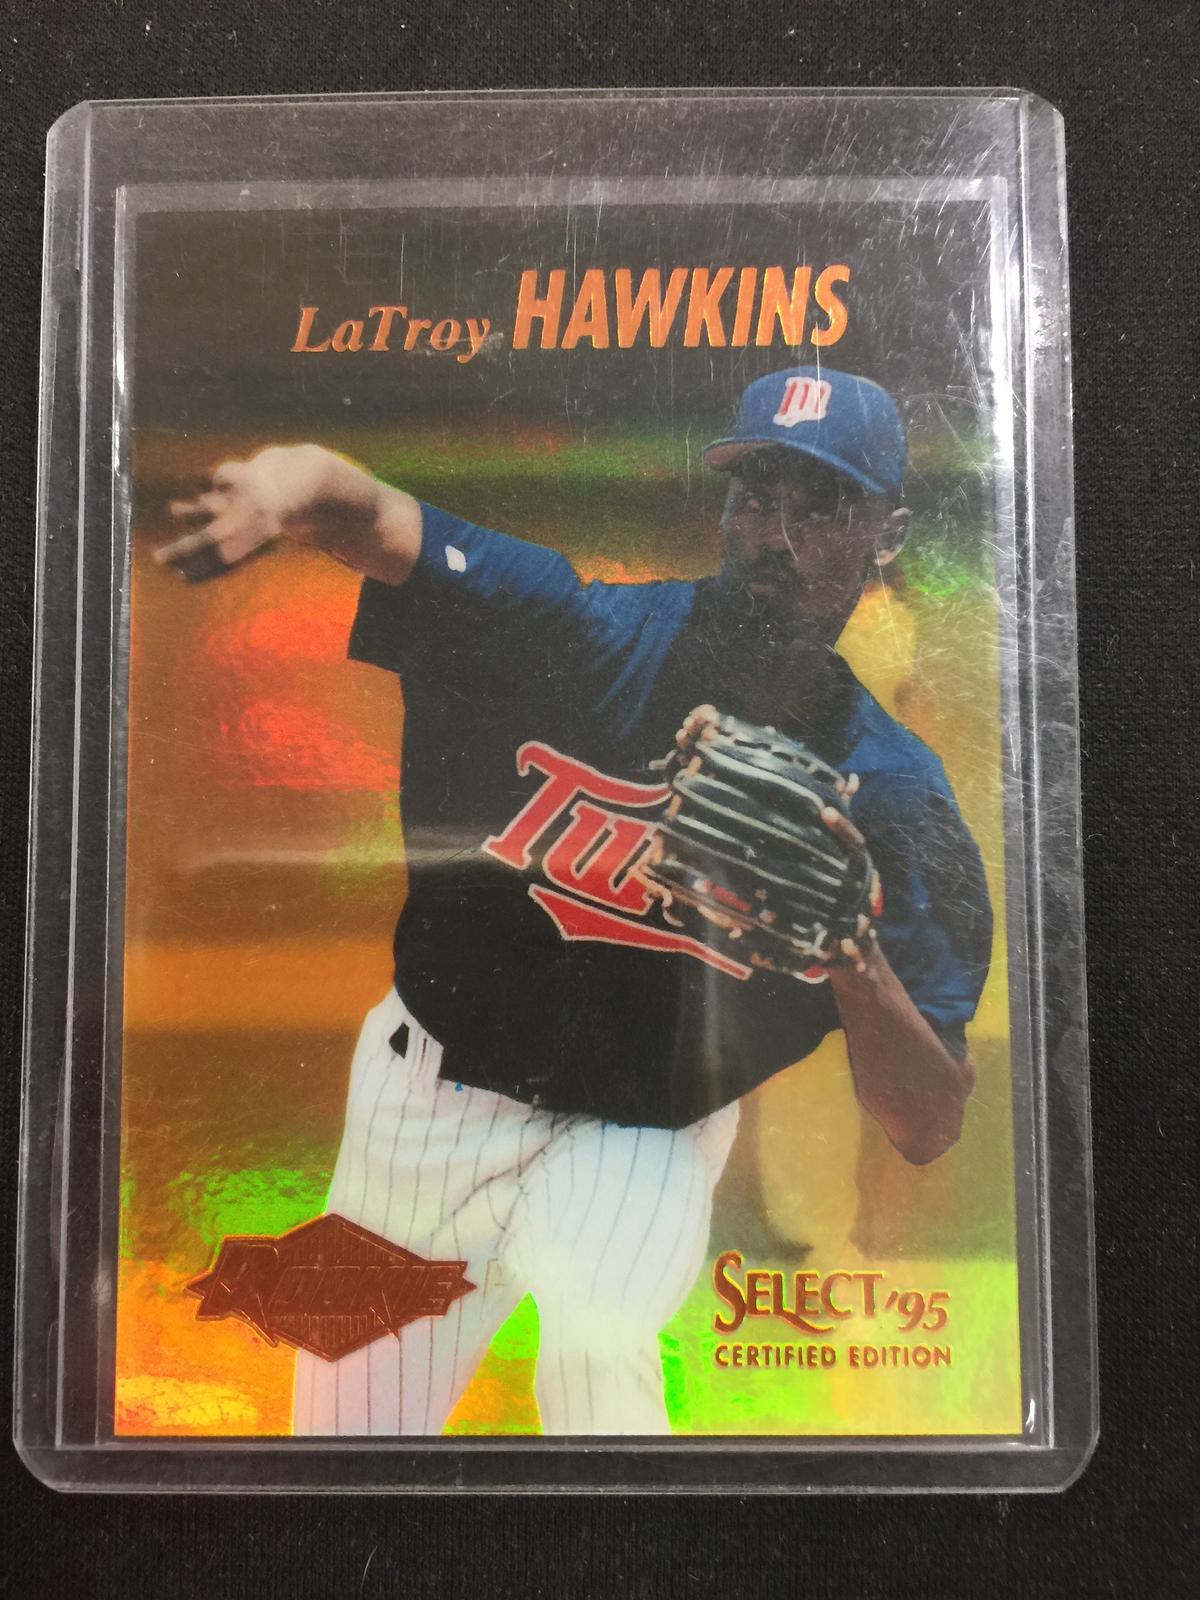 1995 Select Certified Mirror Gold LaTroy Hawkins Twins Rookie Insert Card - Rare